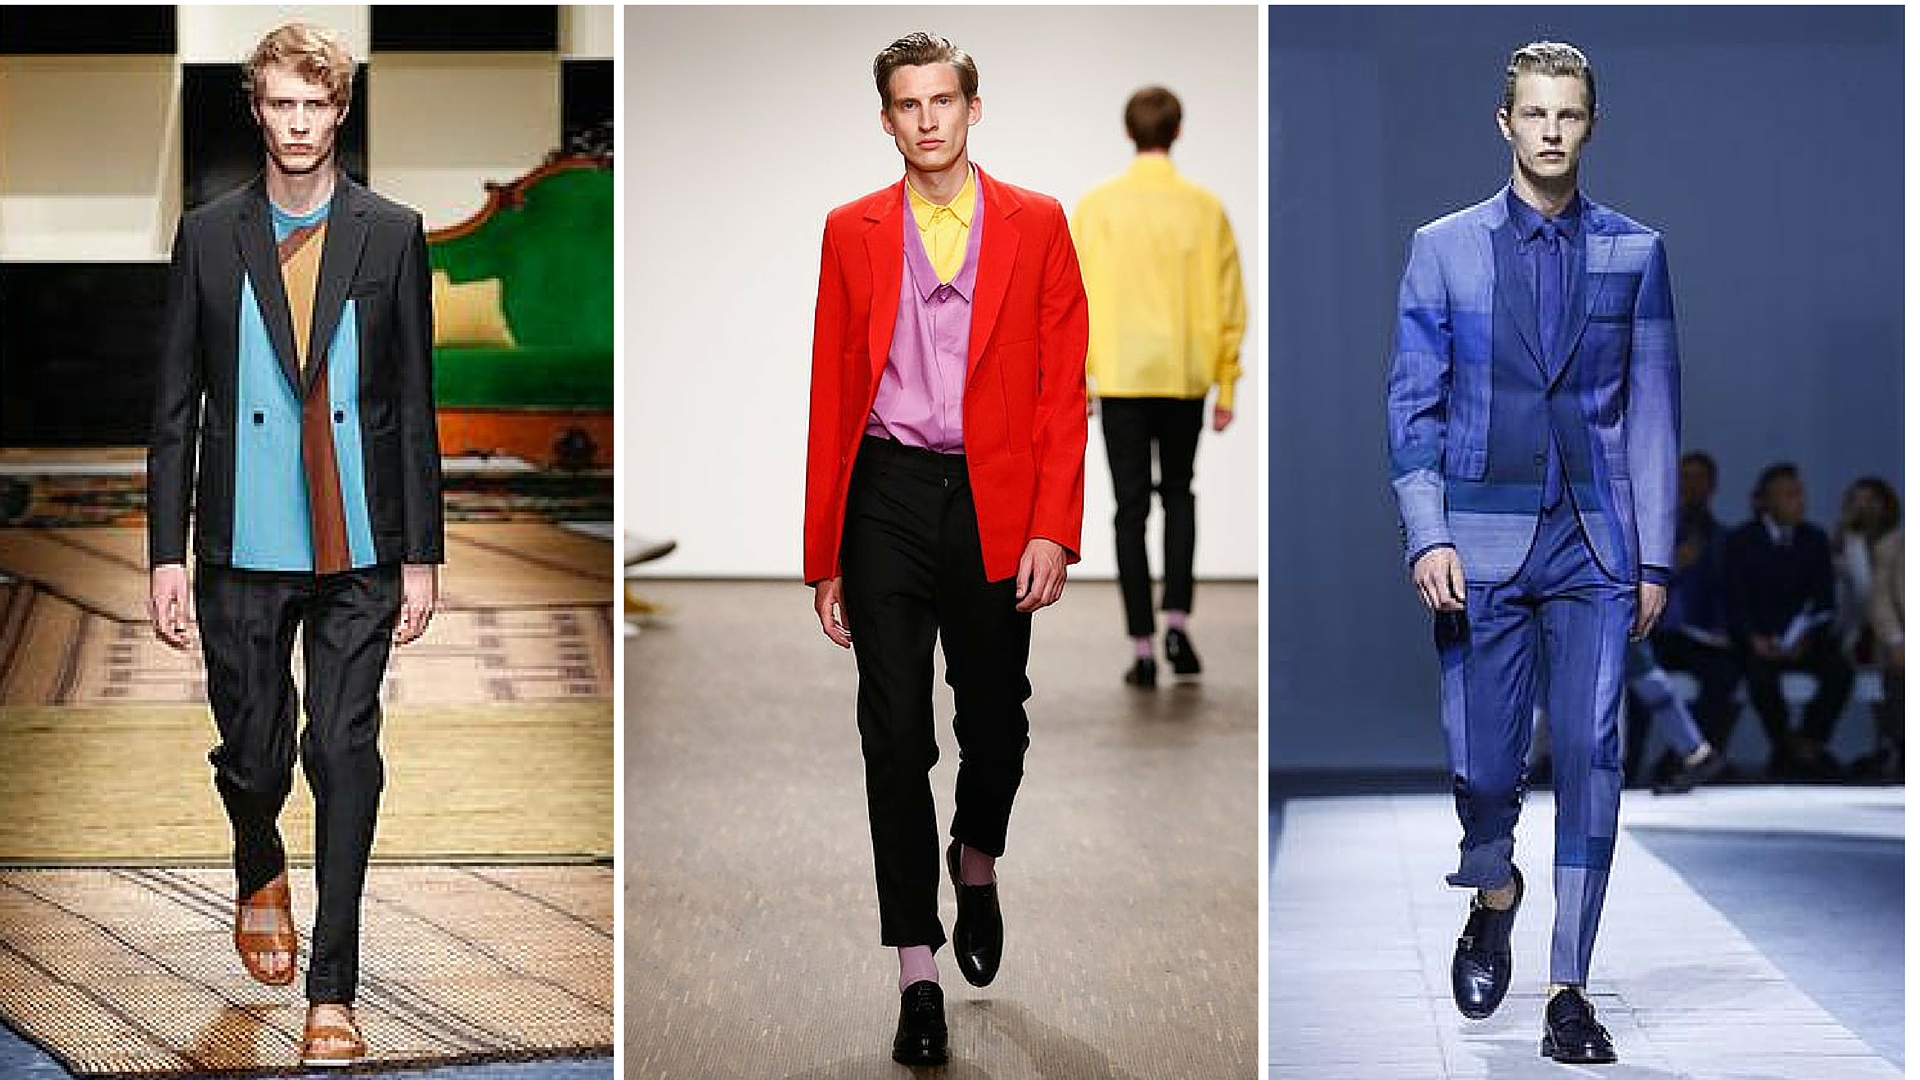 Spring '16 Menswear Trends & Why They'll Work